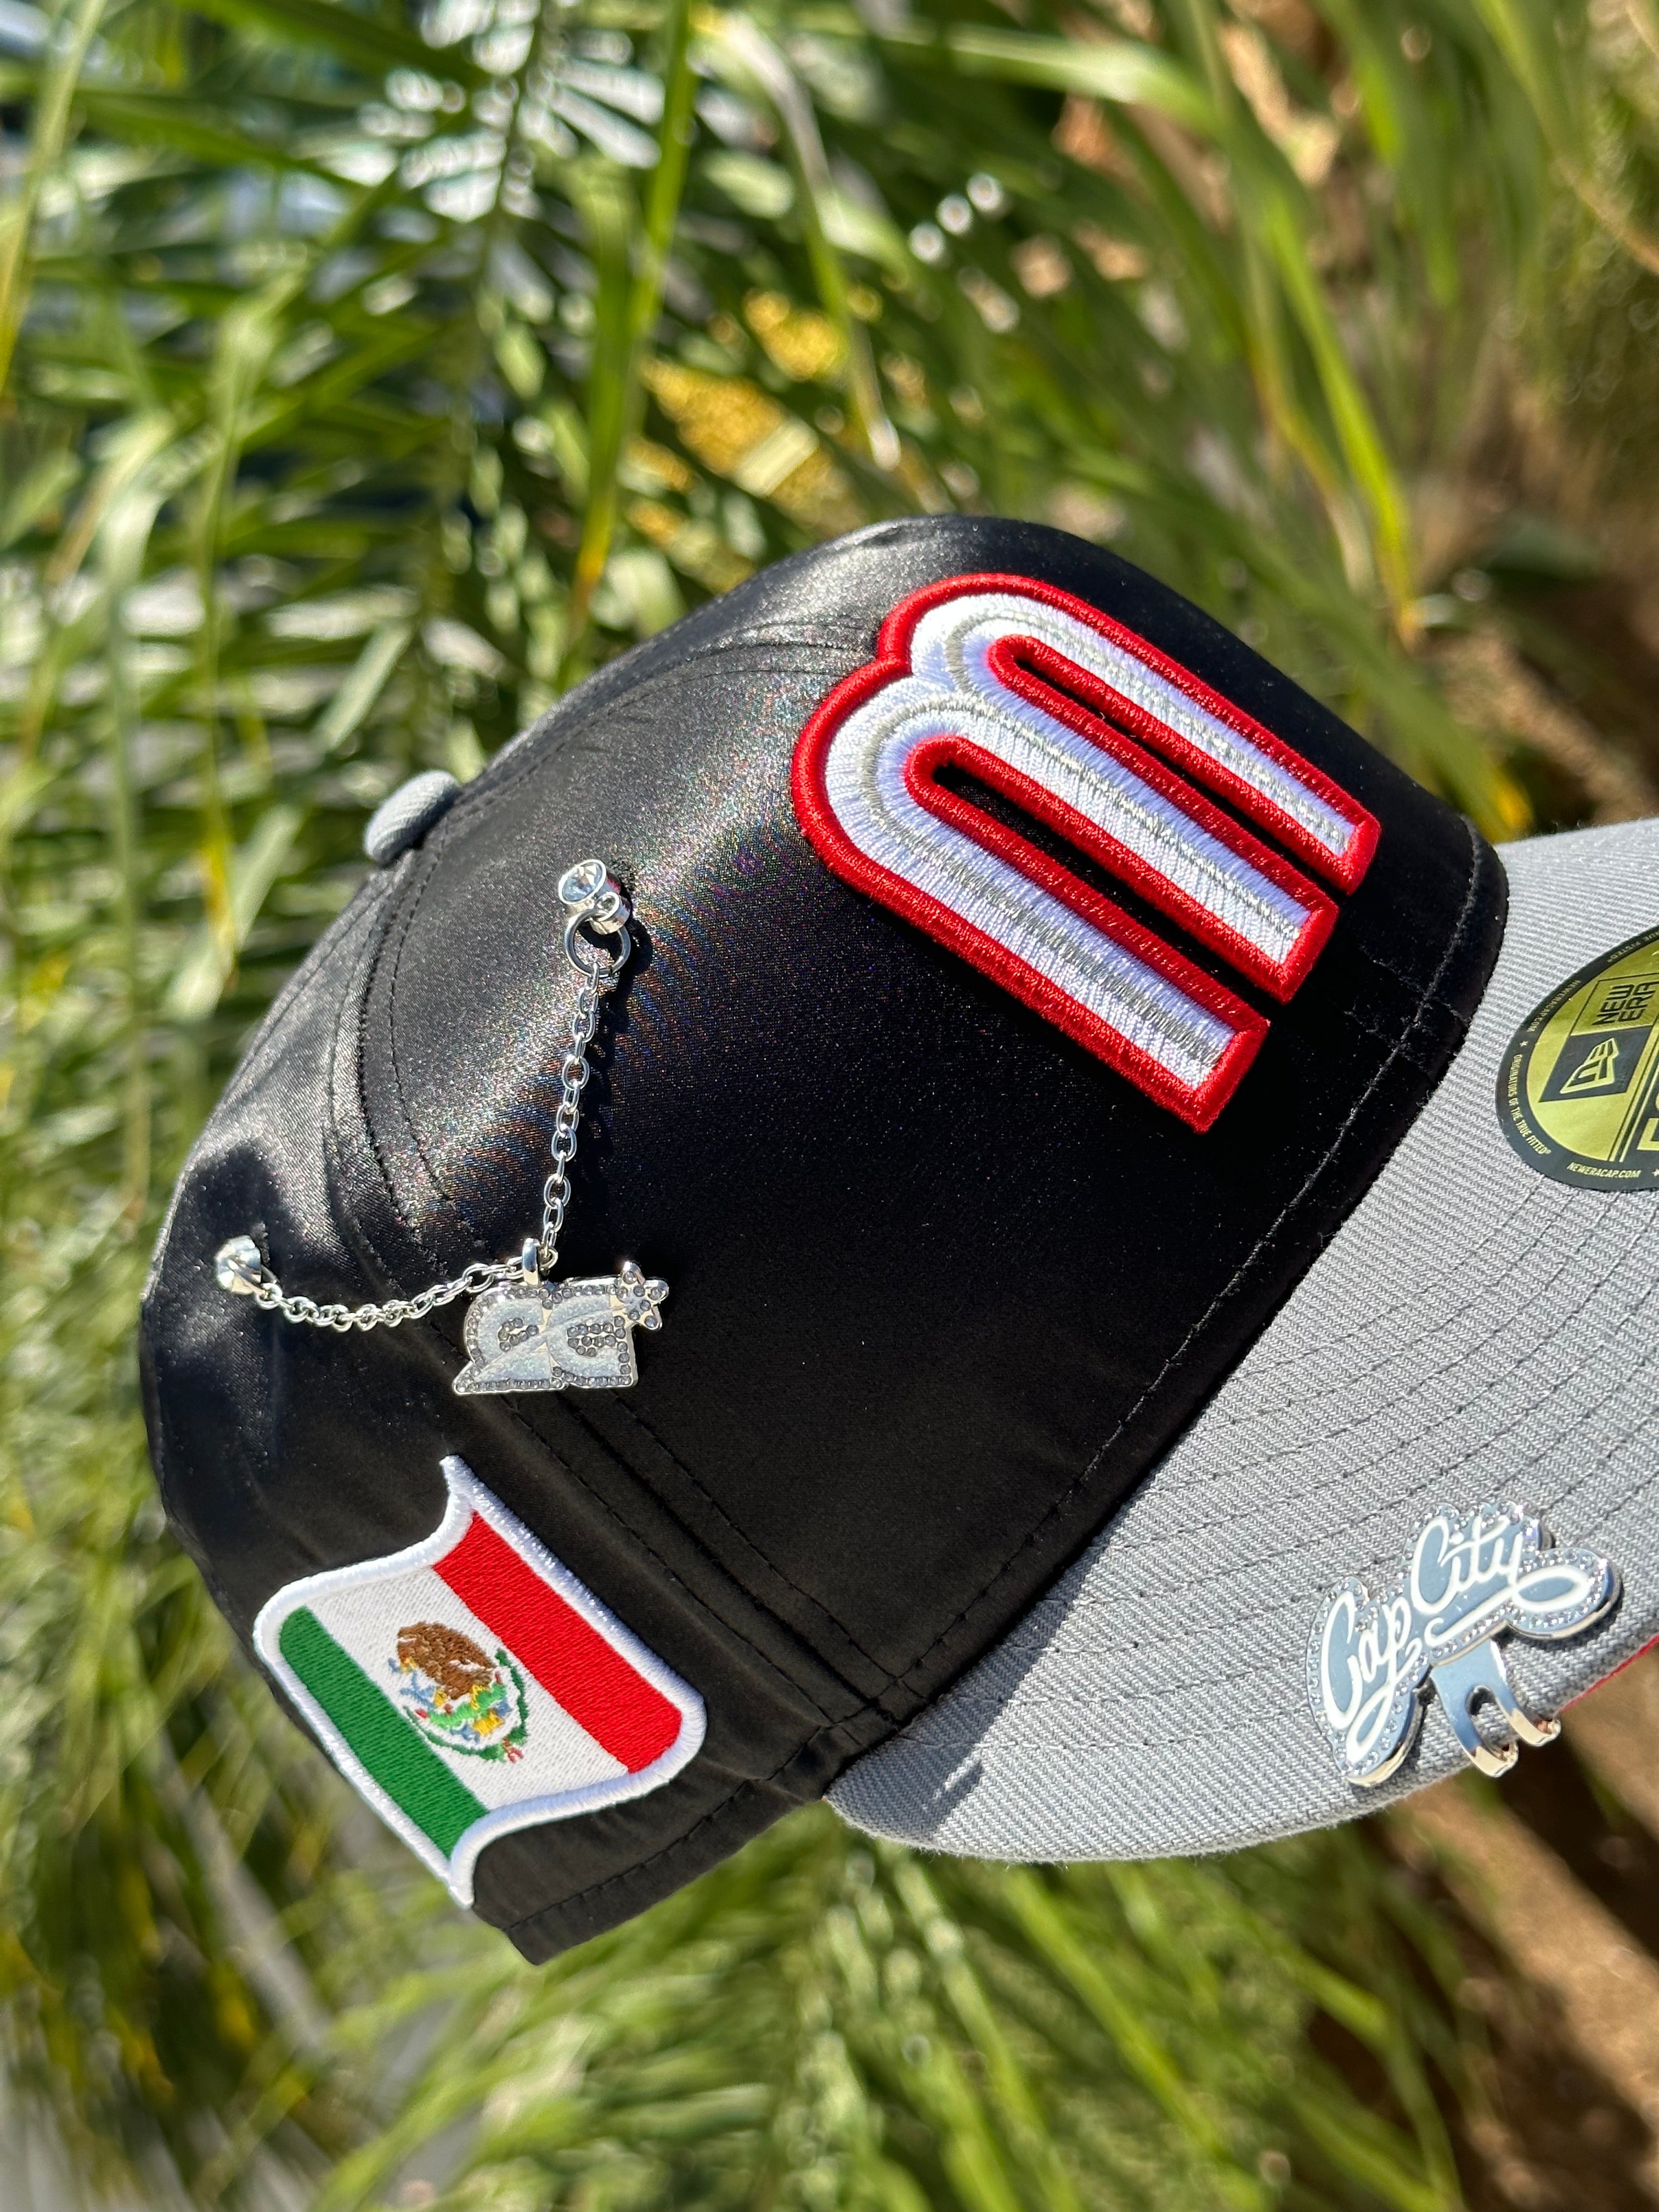 NEW ERA EXCLUSIVE 59FIFTY BLACK SATIN/GREY MEXICO TWO TONE W/ MEXICO SIDE PATCH +AZTEC PATCH